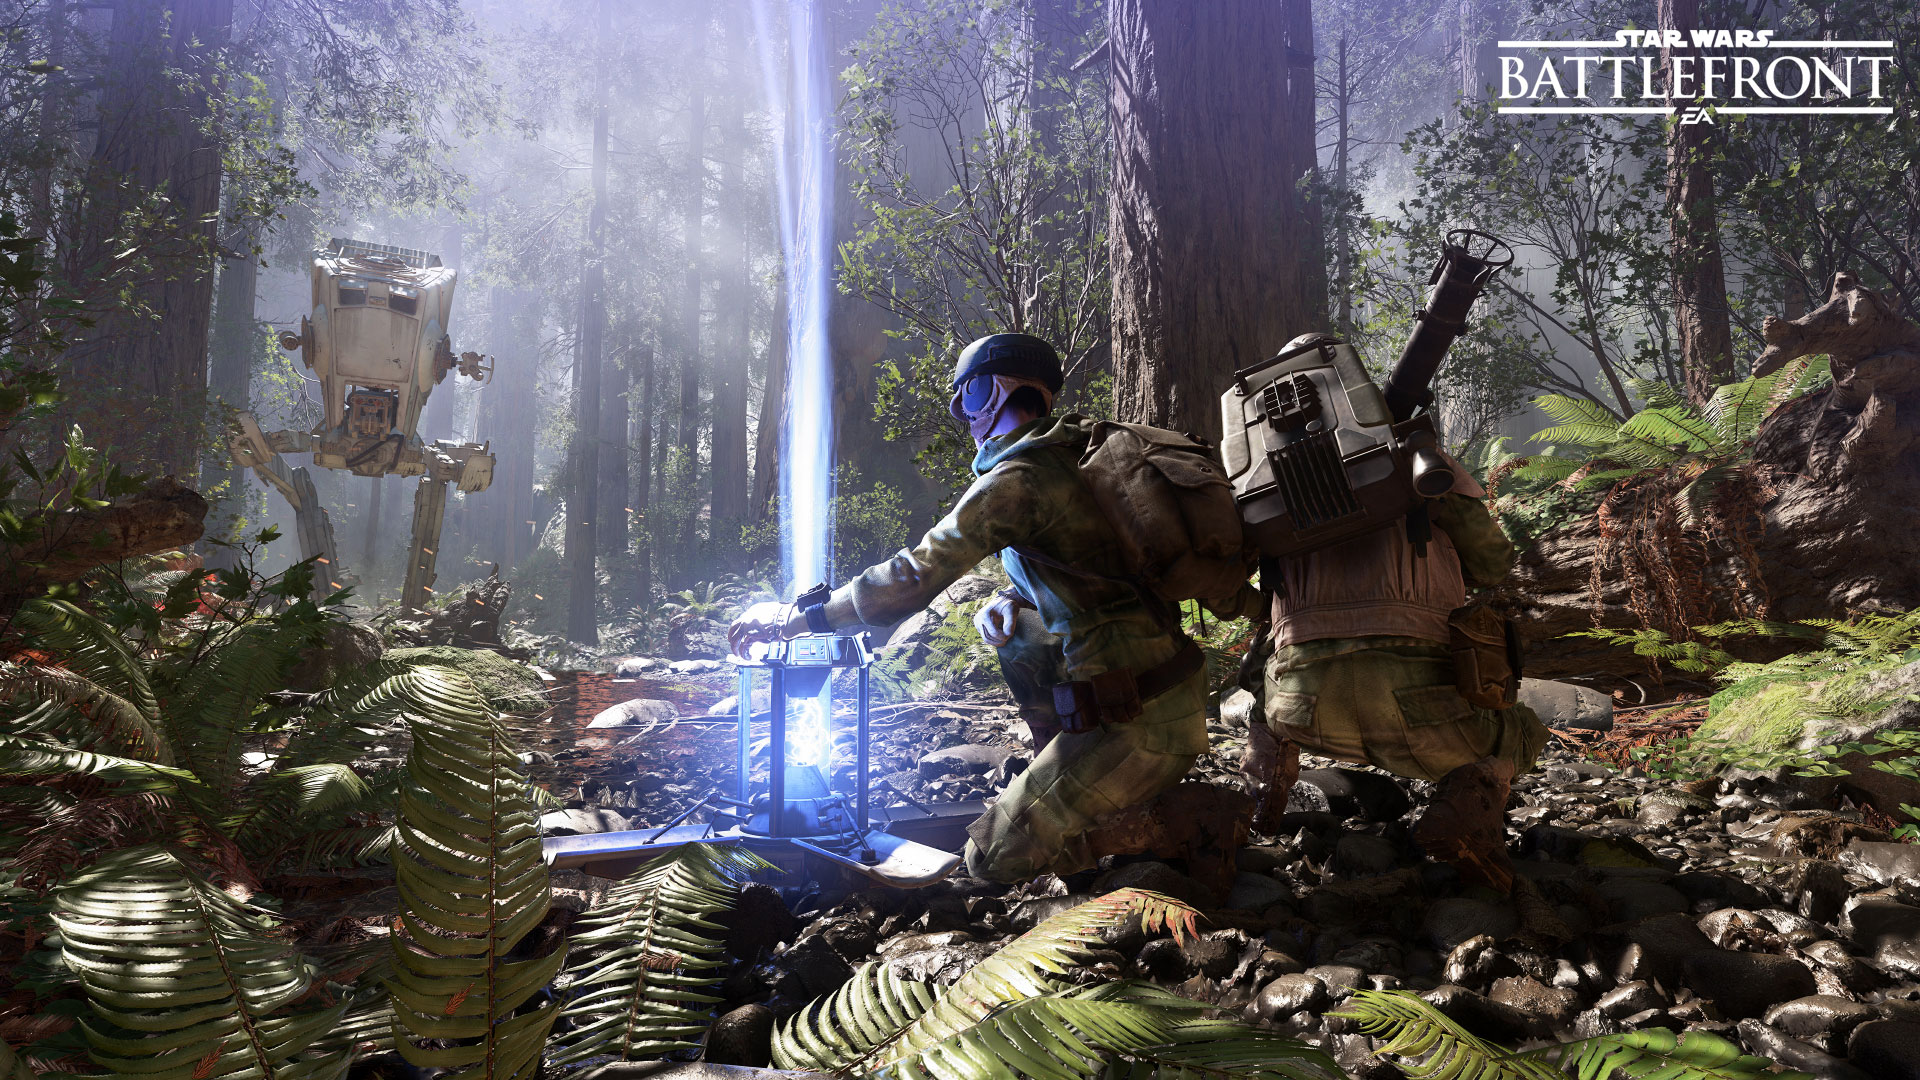 New “Star Wars Battlefront” Info Coming Soon - Lando and Dengar Arriving As Heroes